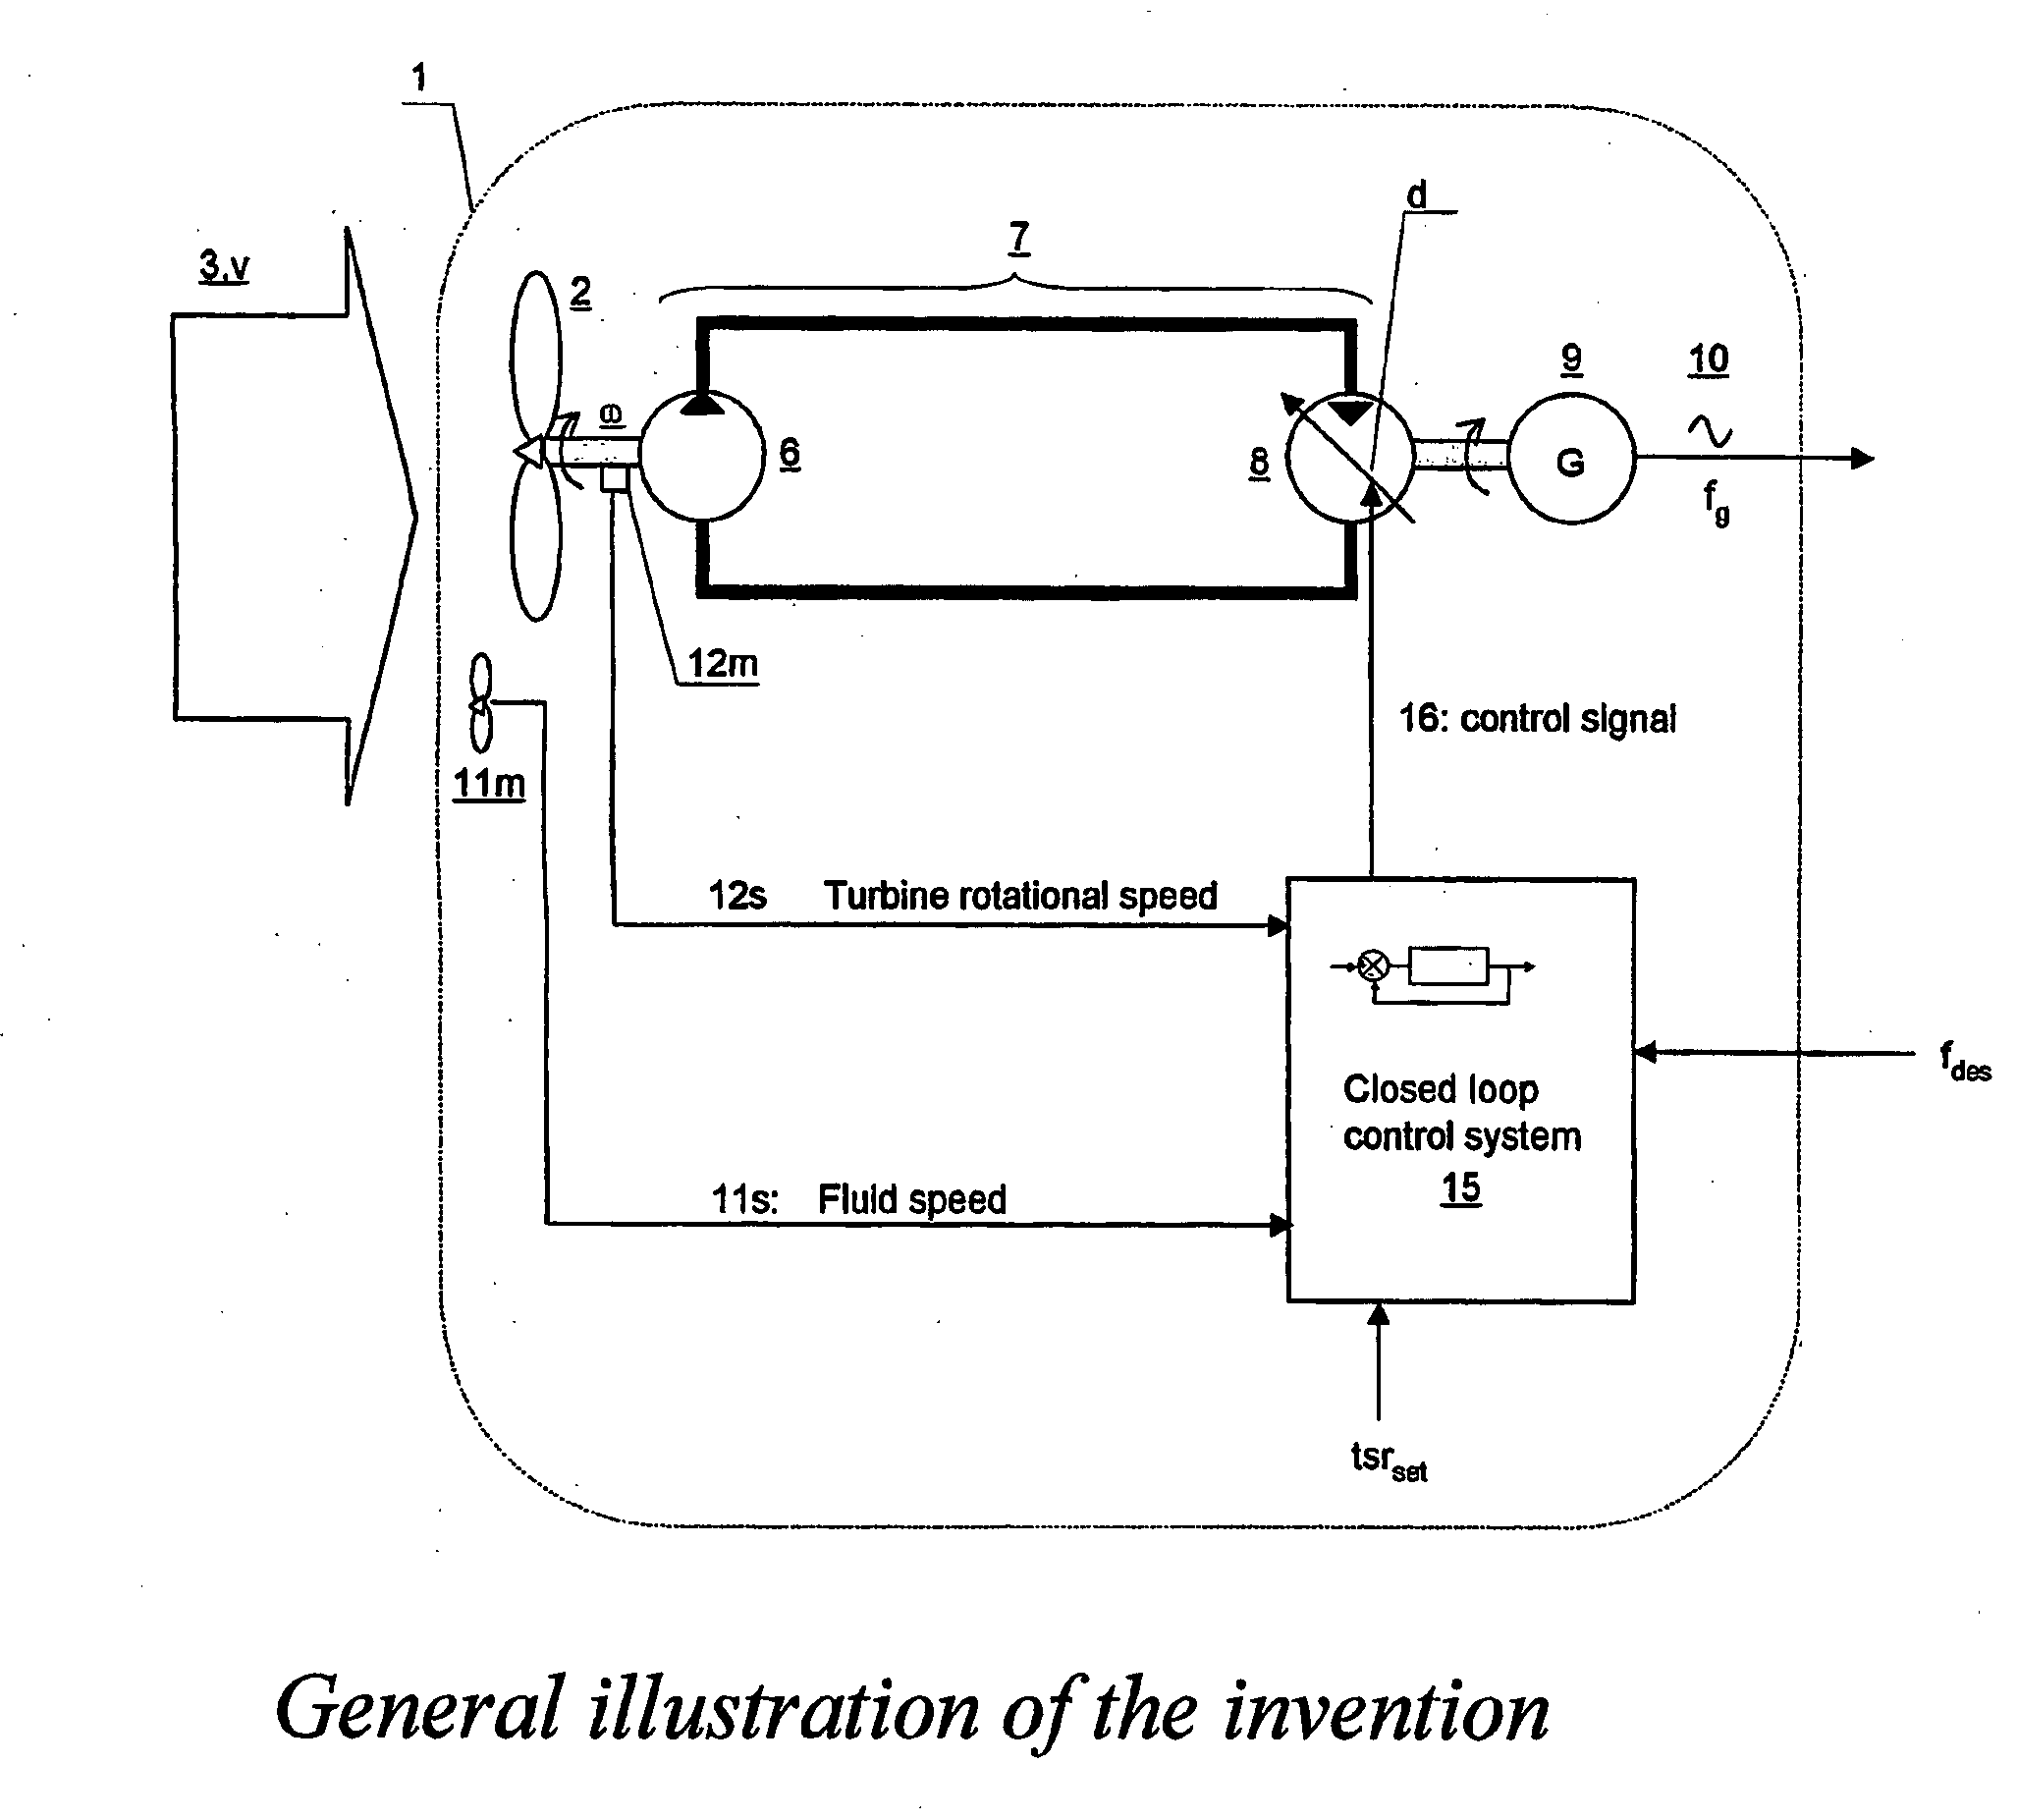 Turbine driven electric power production system and a method for control thereof